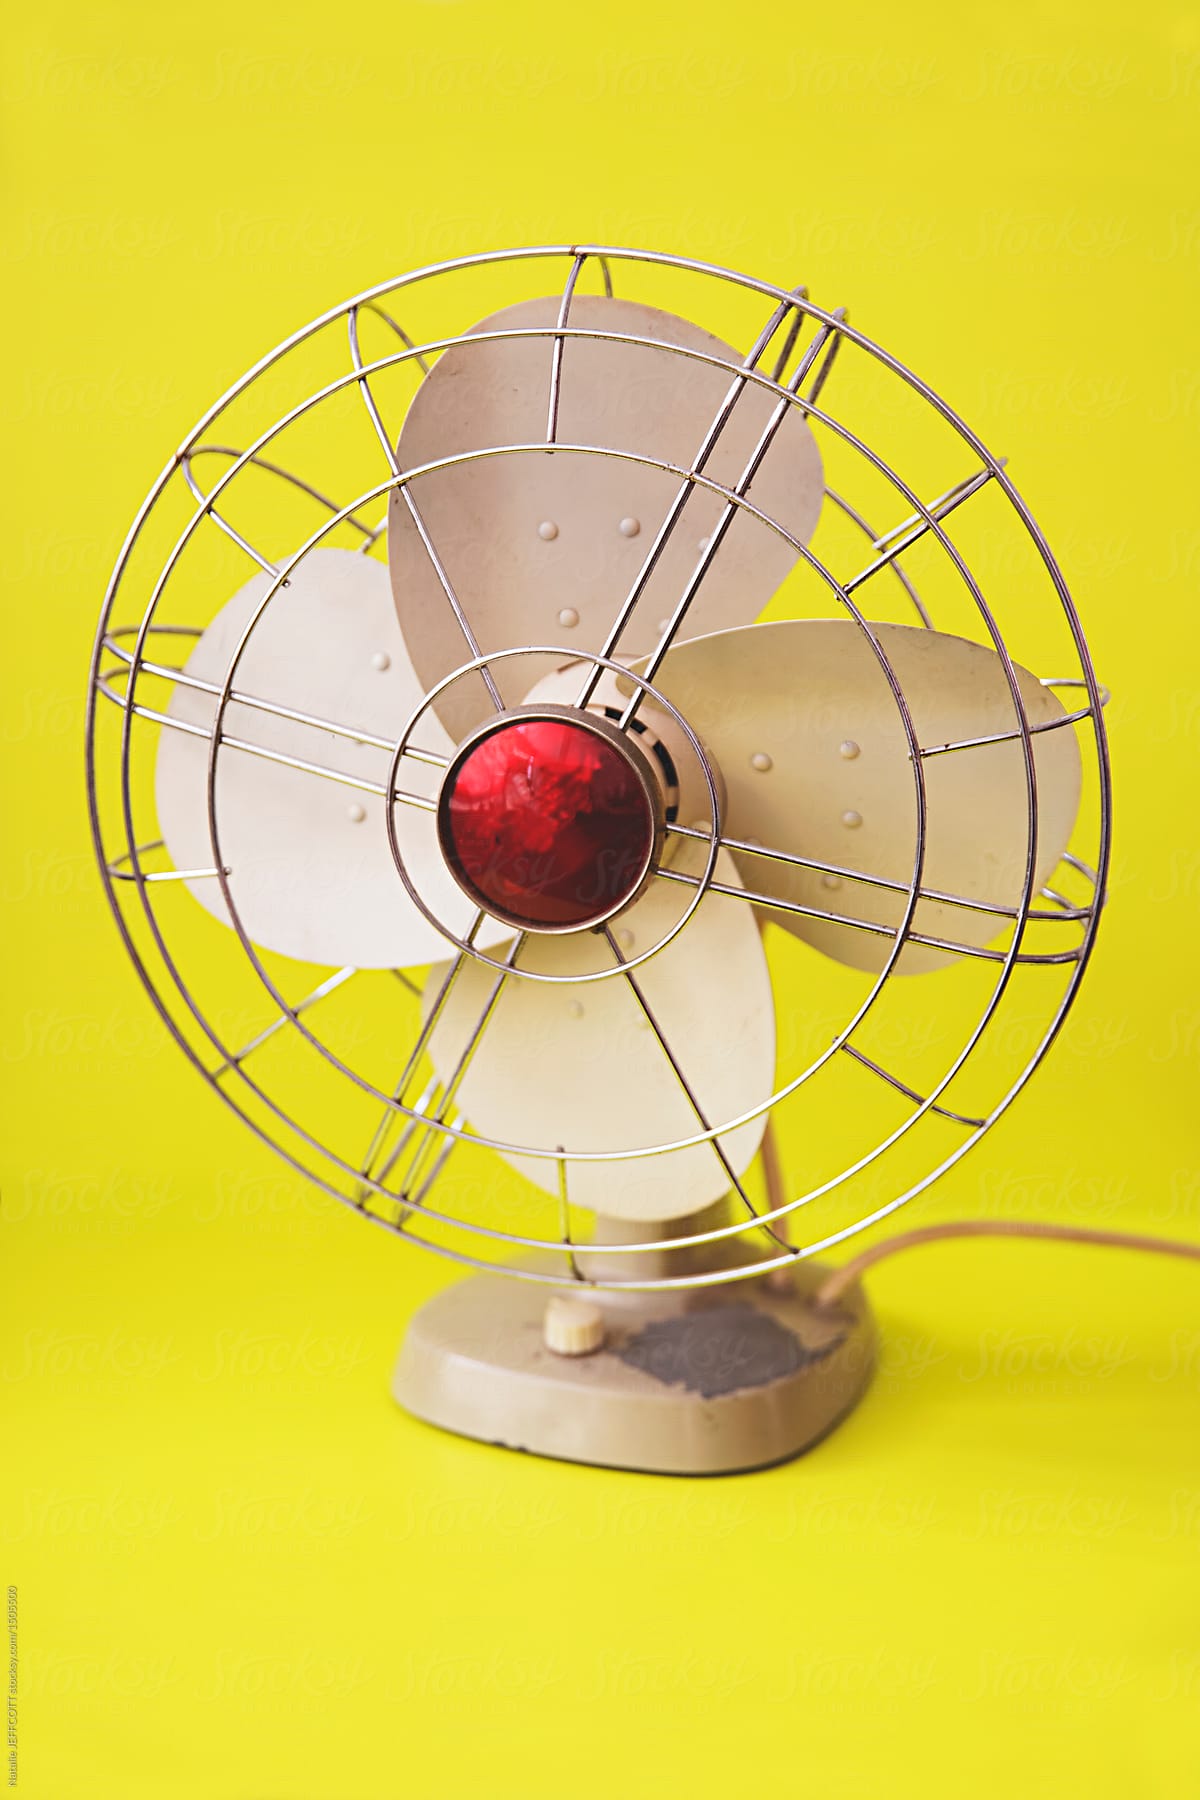 Retro cooling fan on yellow background